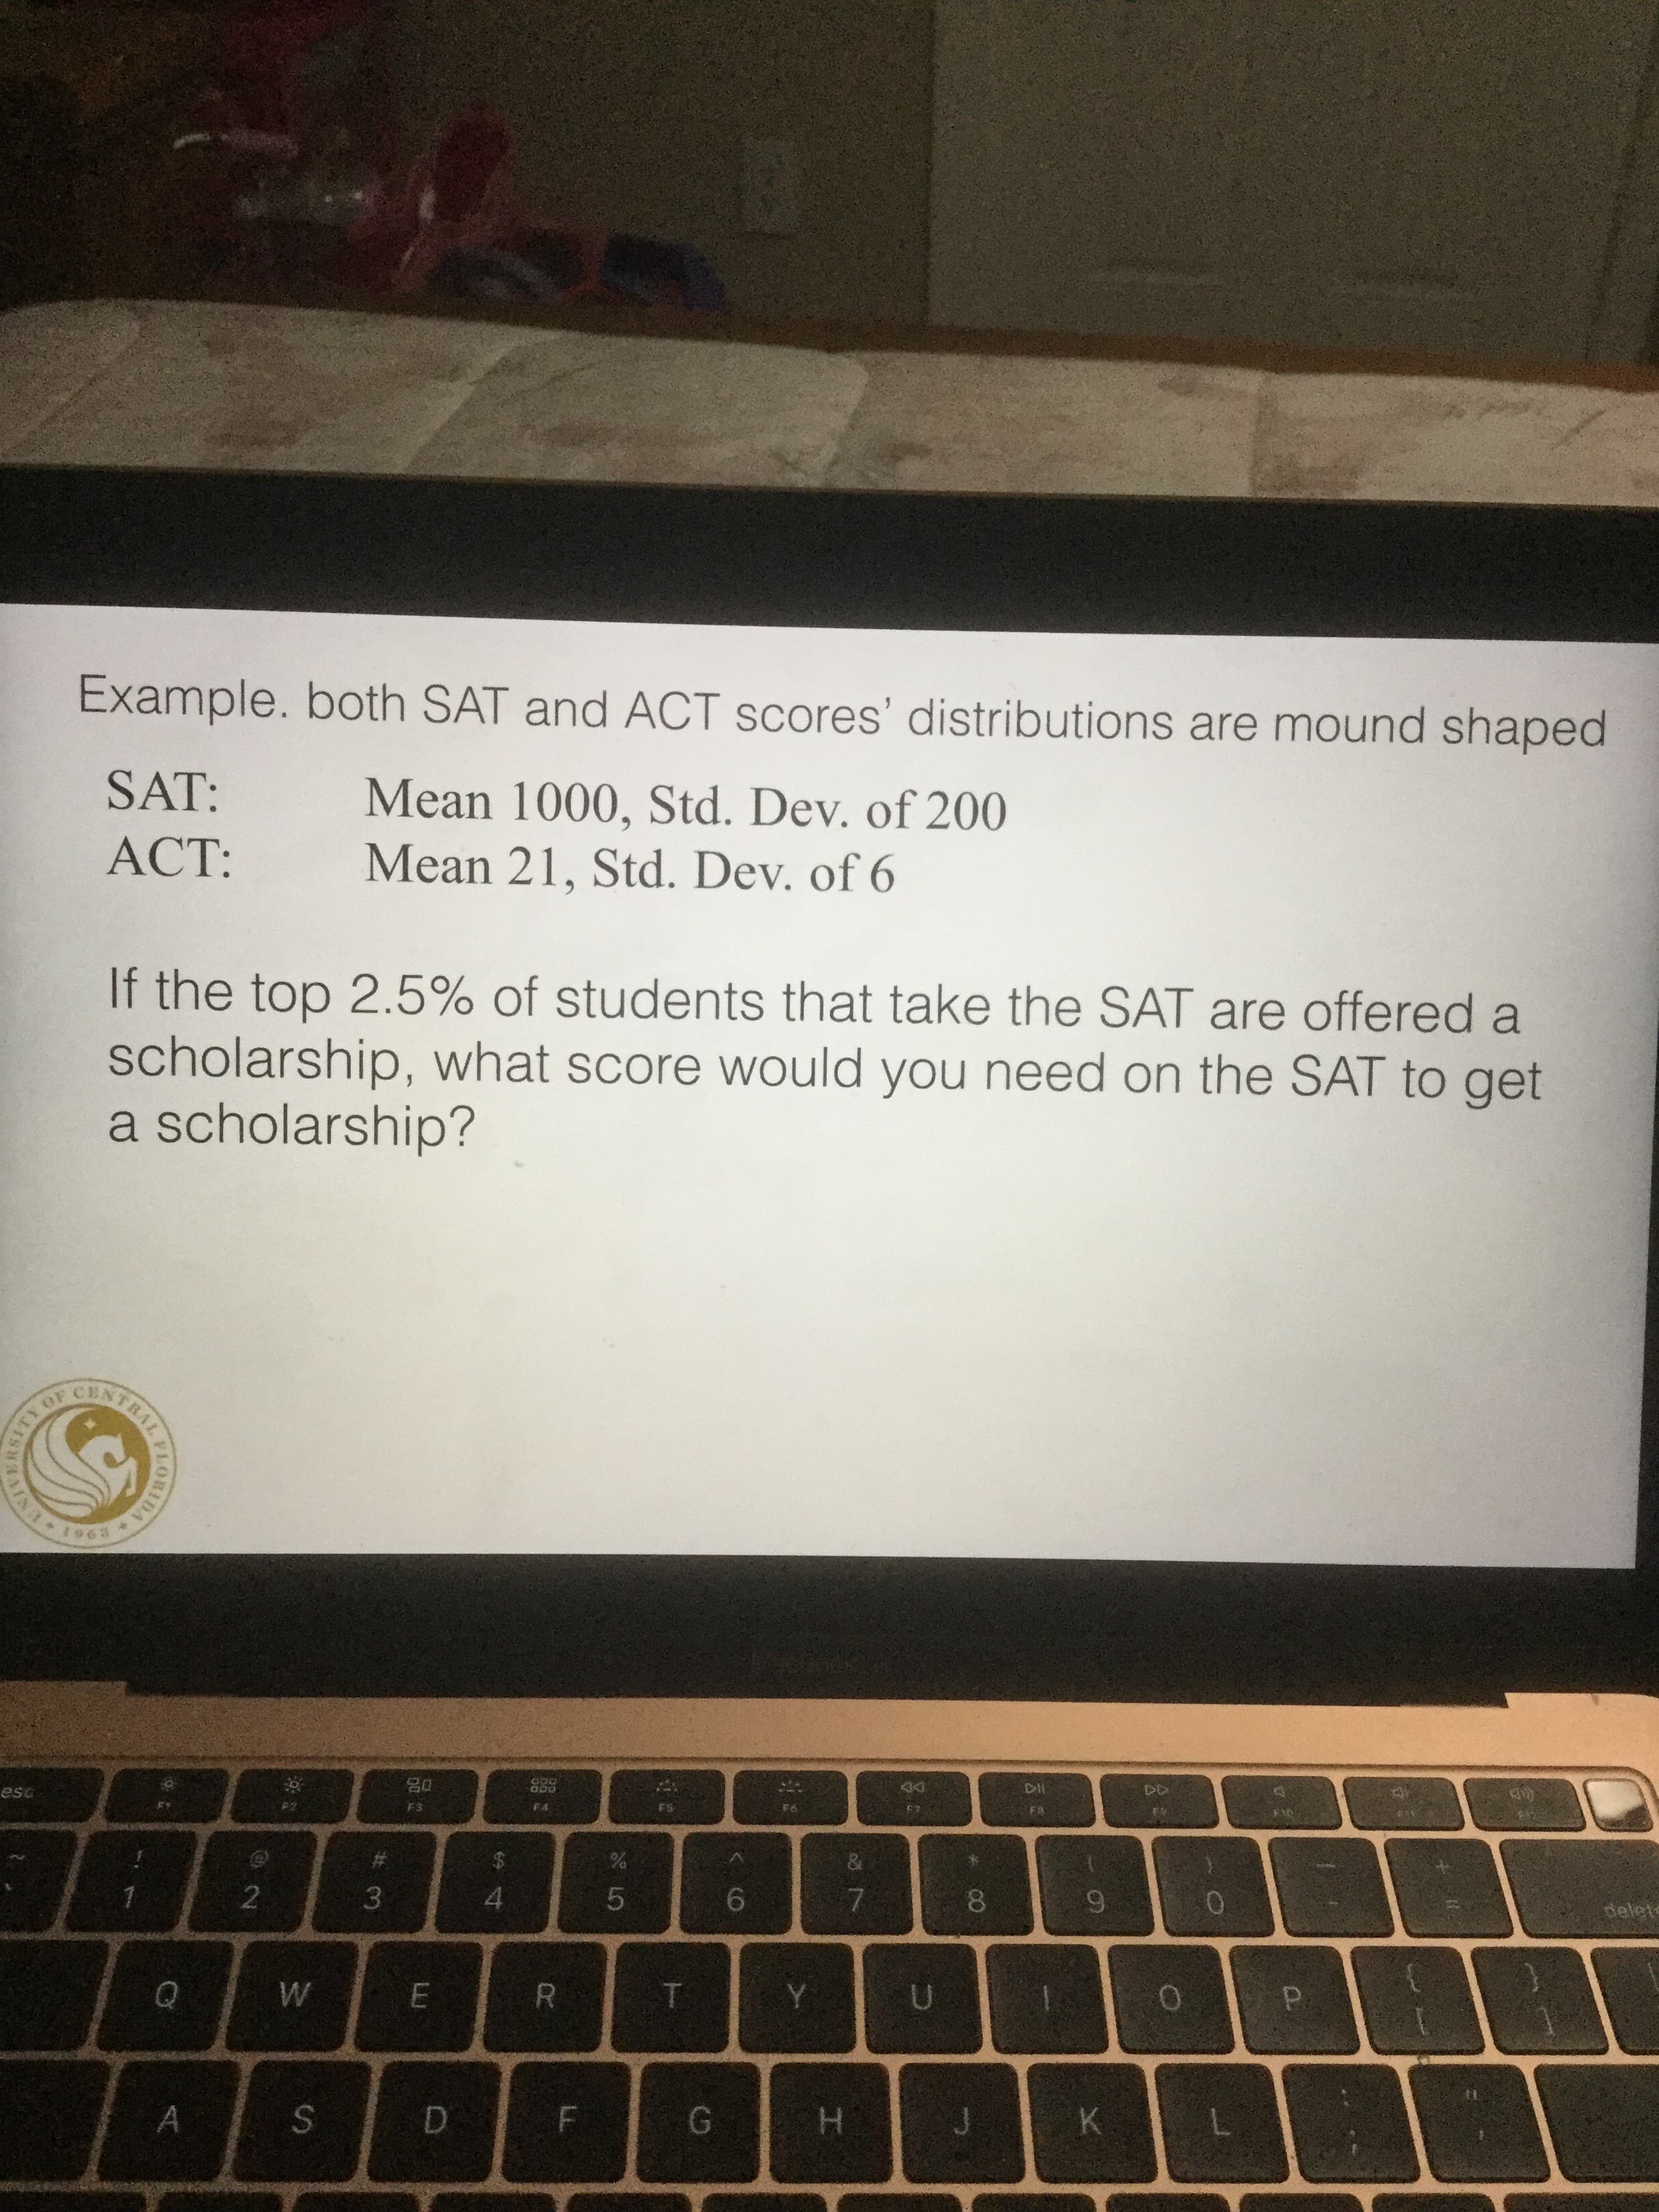 Example. both SAT and ACT scores' distributions are mound shaped
SAT:
Mean 1000, Std. Dev. of 200
Mean 21, Std. Dev. of 6
ACT:
If the top 2.5% of students that take the SAT are offered a
scholarship, what score would you need on the SAT to get
a scholarship?
OF
CEN
1963
o00
DII
esu
F3
F4
Fa
$
2
3
4
6
7
9
delets
Q
W
E
T
Y
U
S
A
G
D
F
H
K
CO
LO
LE
DA
IRORANS
TRAL
